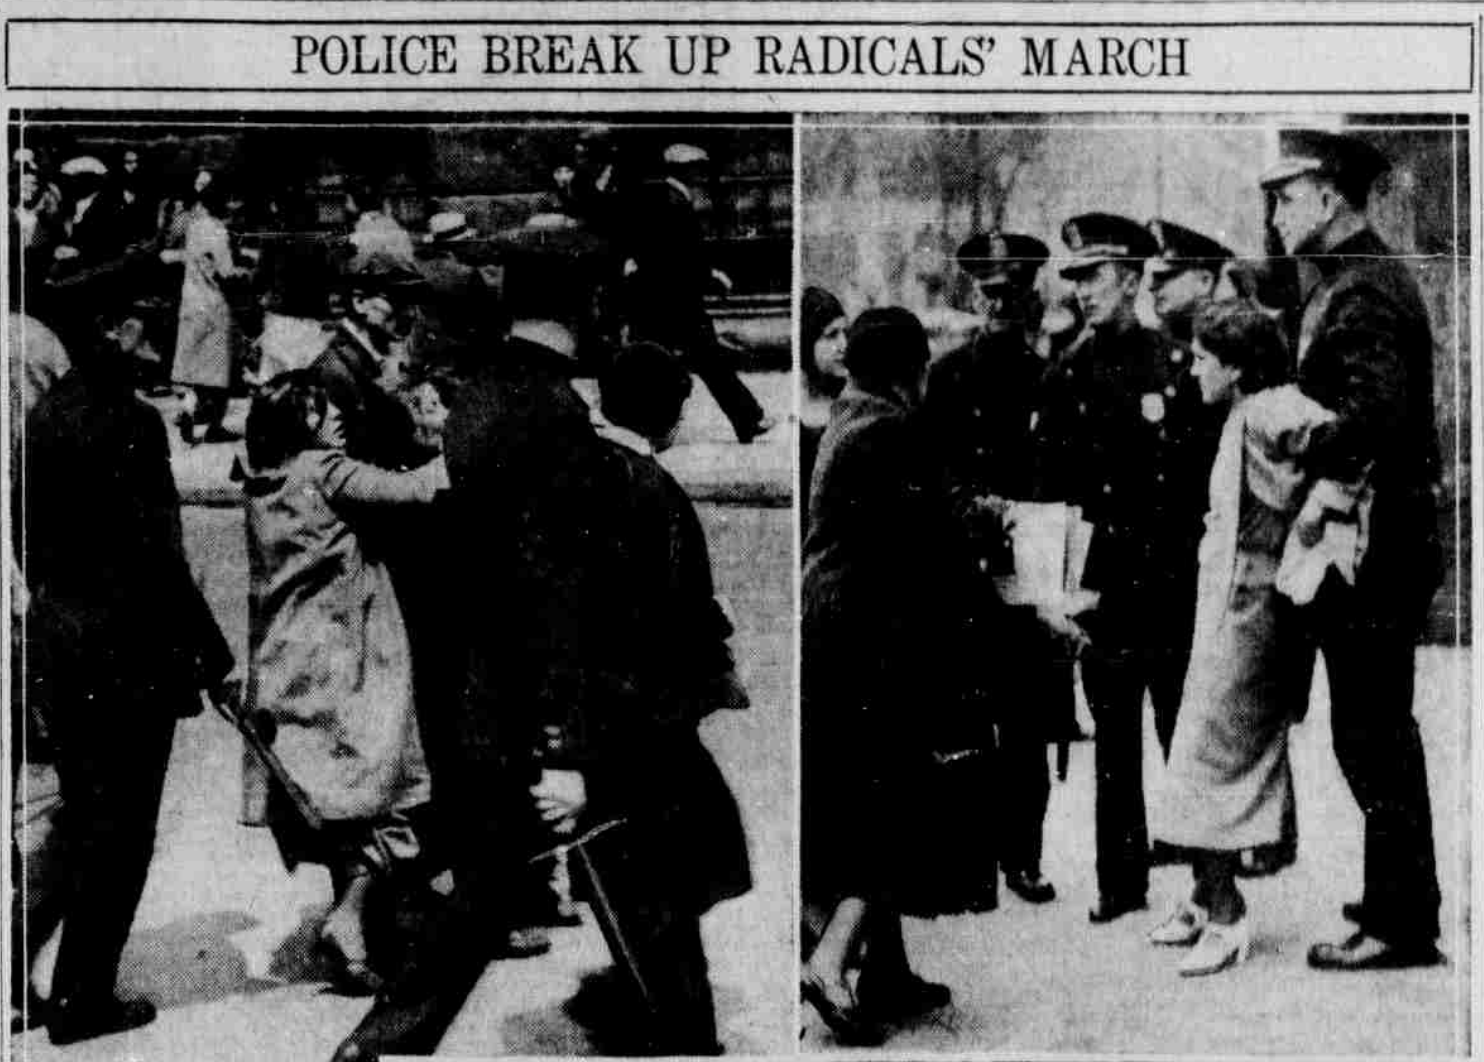   “Police break up radicals’ march,” Philadelphia Inquirer, May 1, 1932. Left image shows an officer with a nightstick grabbing a woman, right image shows an officer detaining a woman with her arms behind her back.  